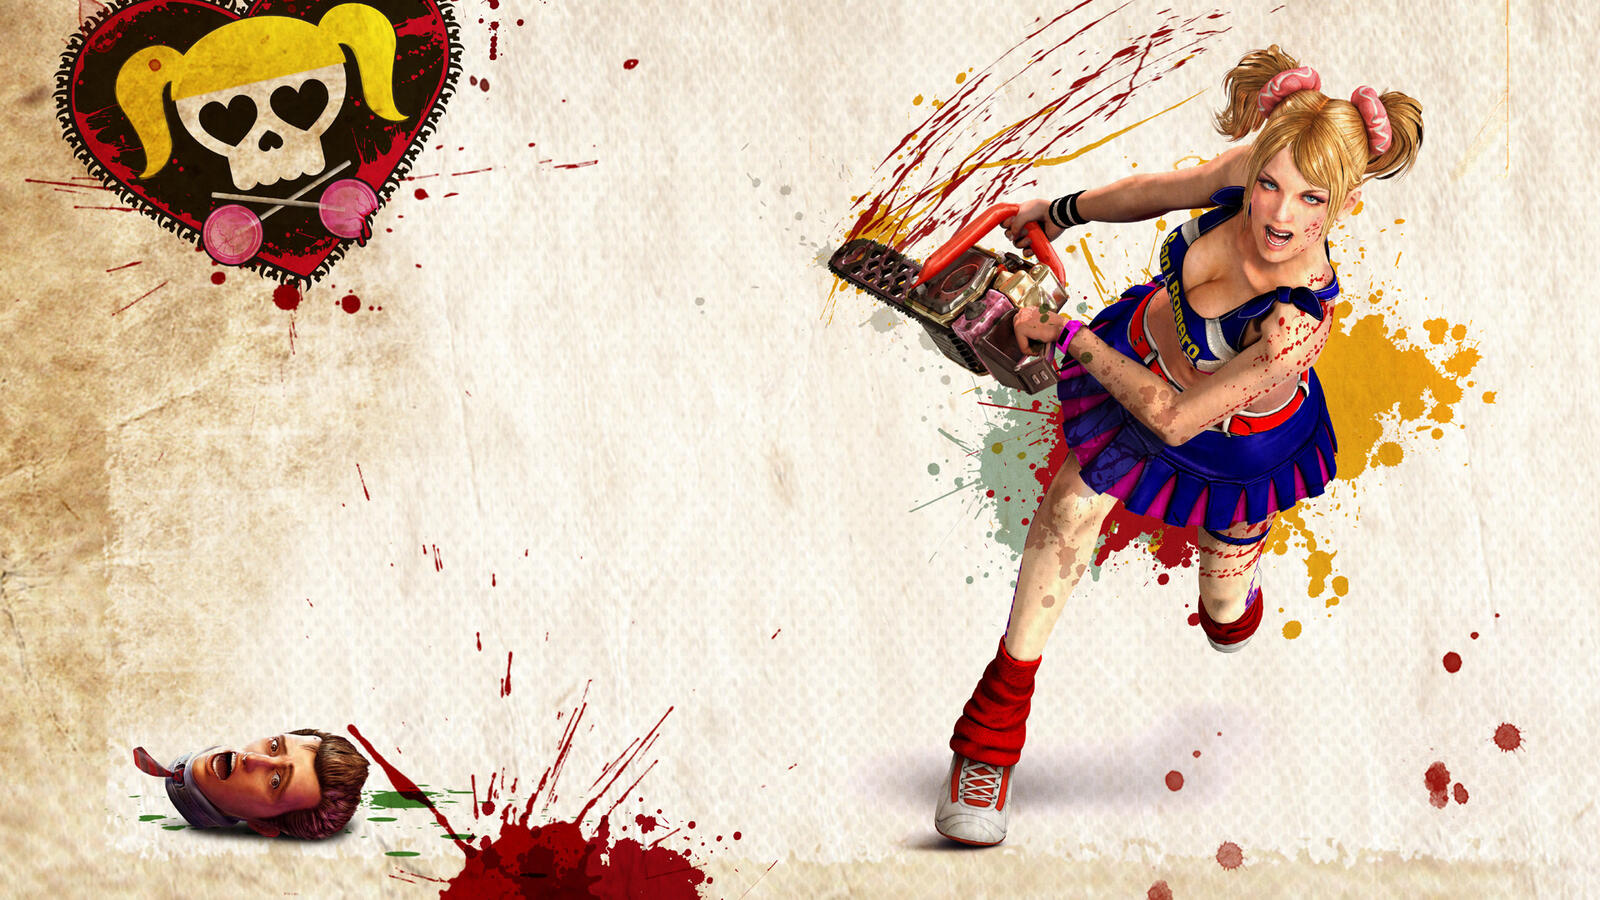 Wallpapers girl chainsaw suit on the desktop